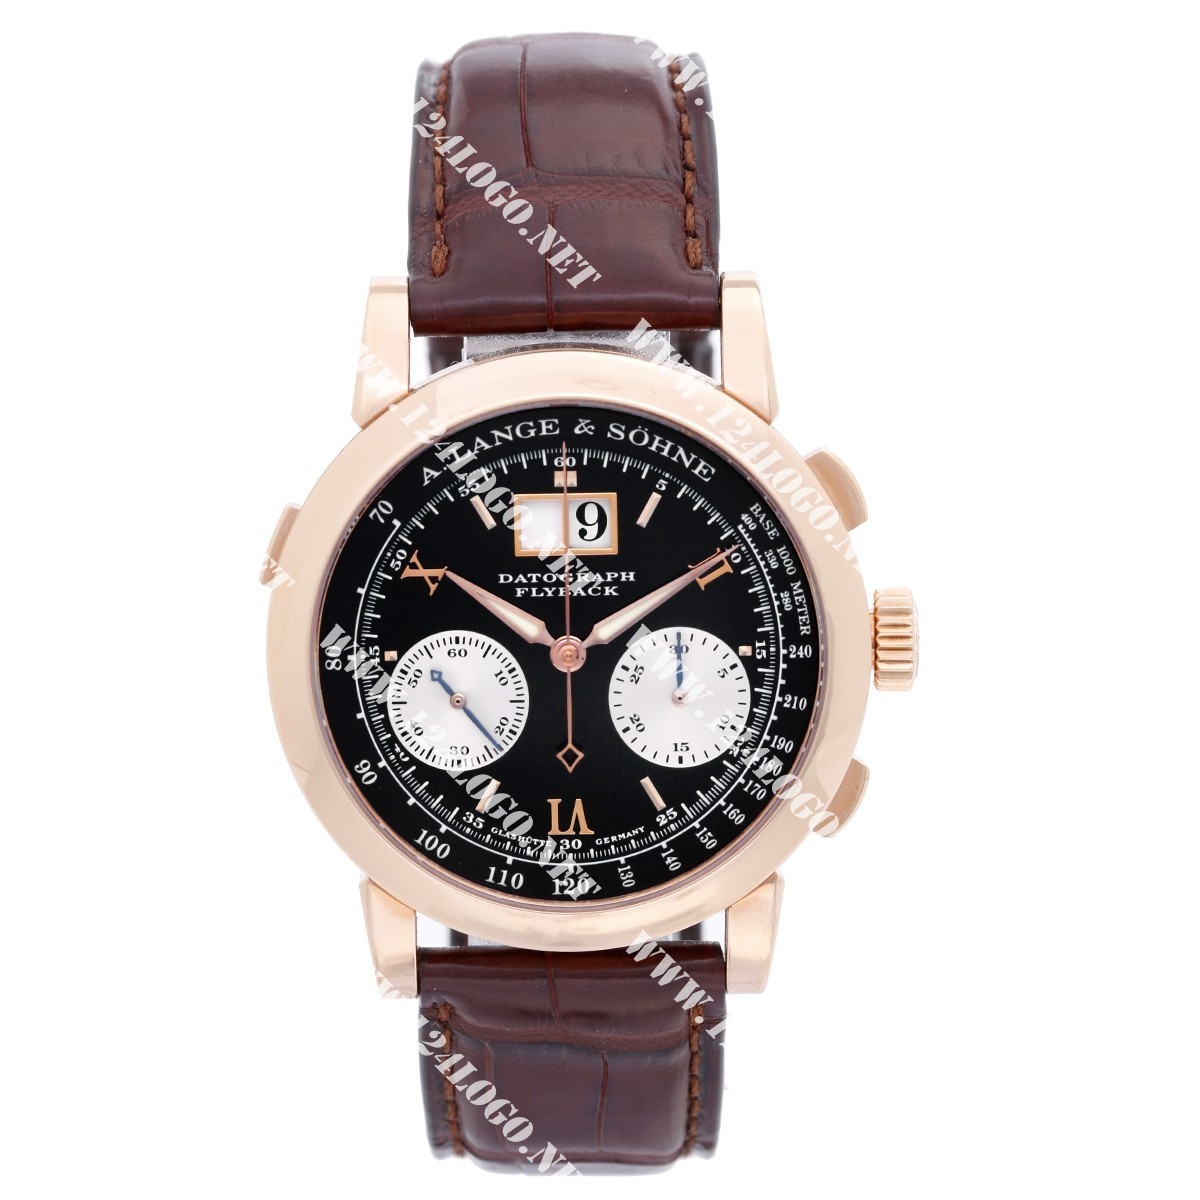 Replica A. Lange & Sohne Datograph Fly-Back-Chrono 403.031